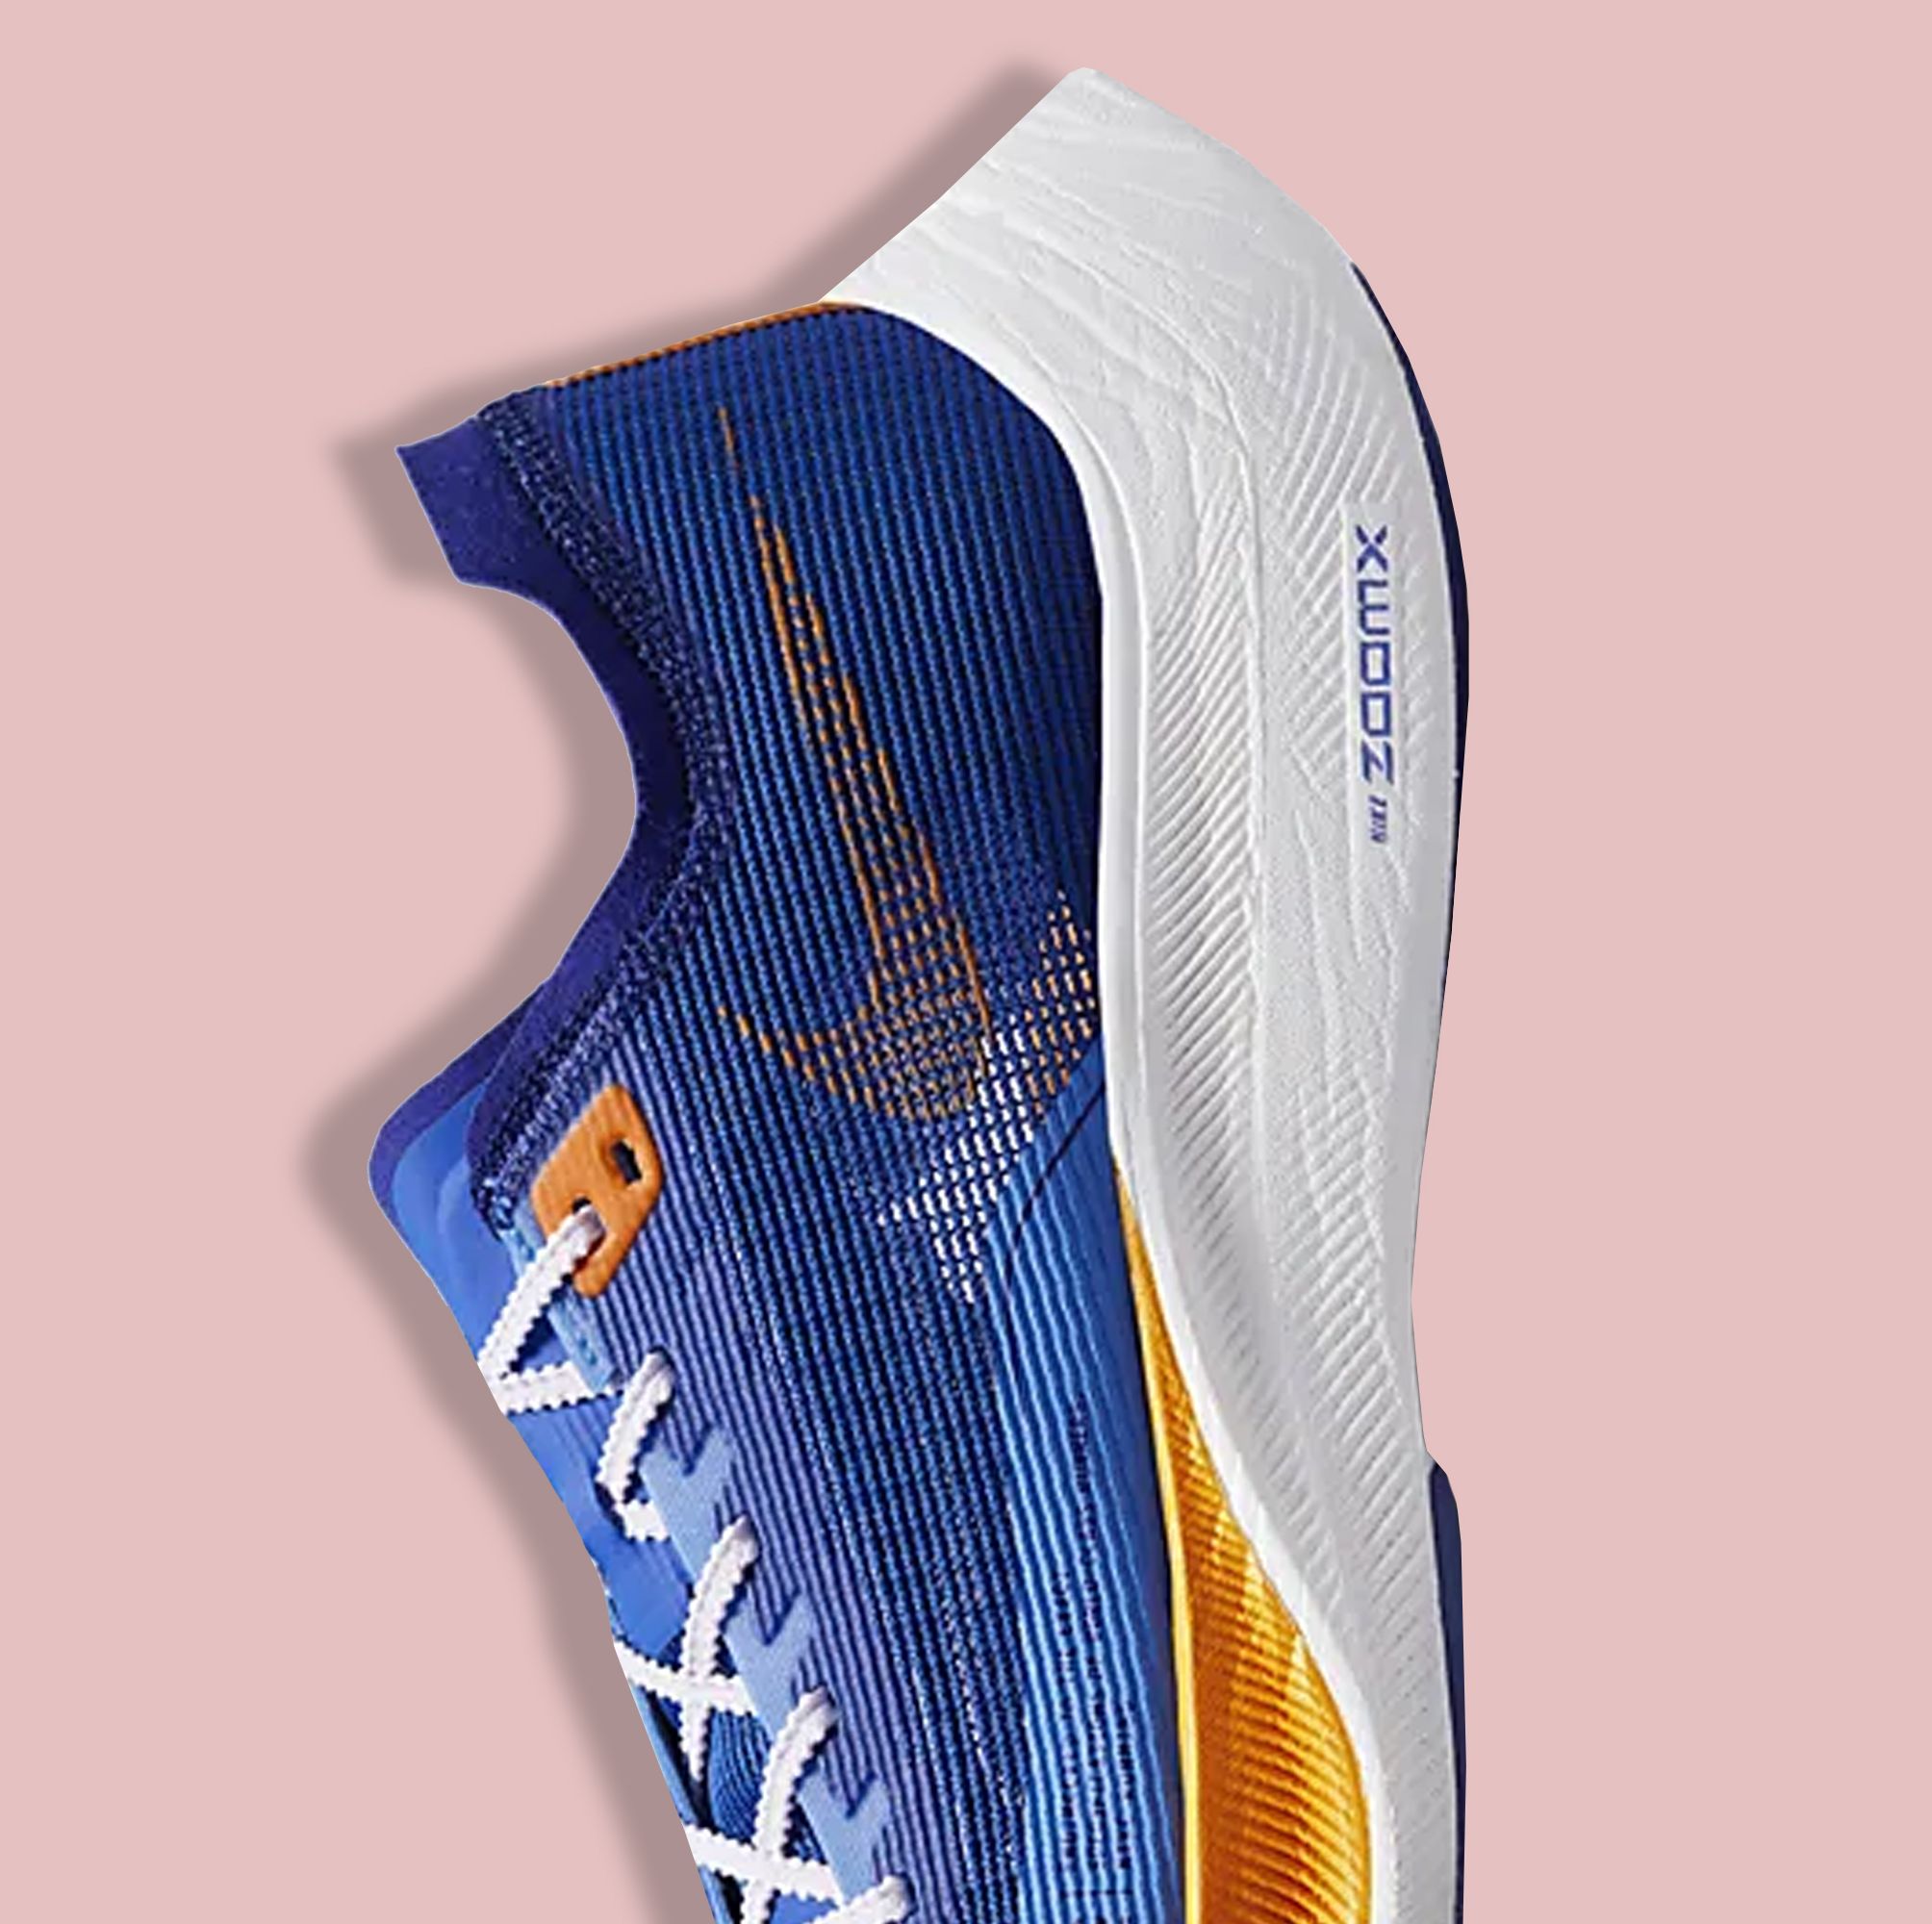 The 10 Best Nike Running Shoes So You Can Just Do It